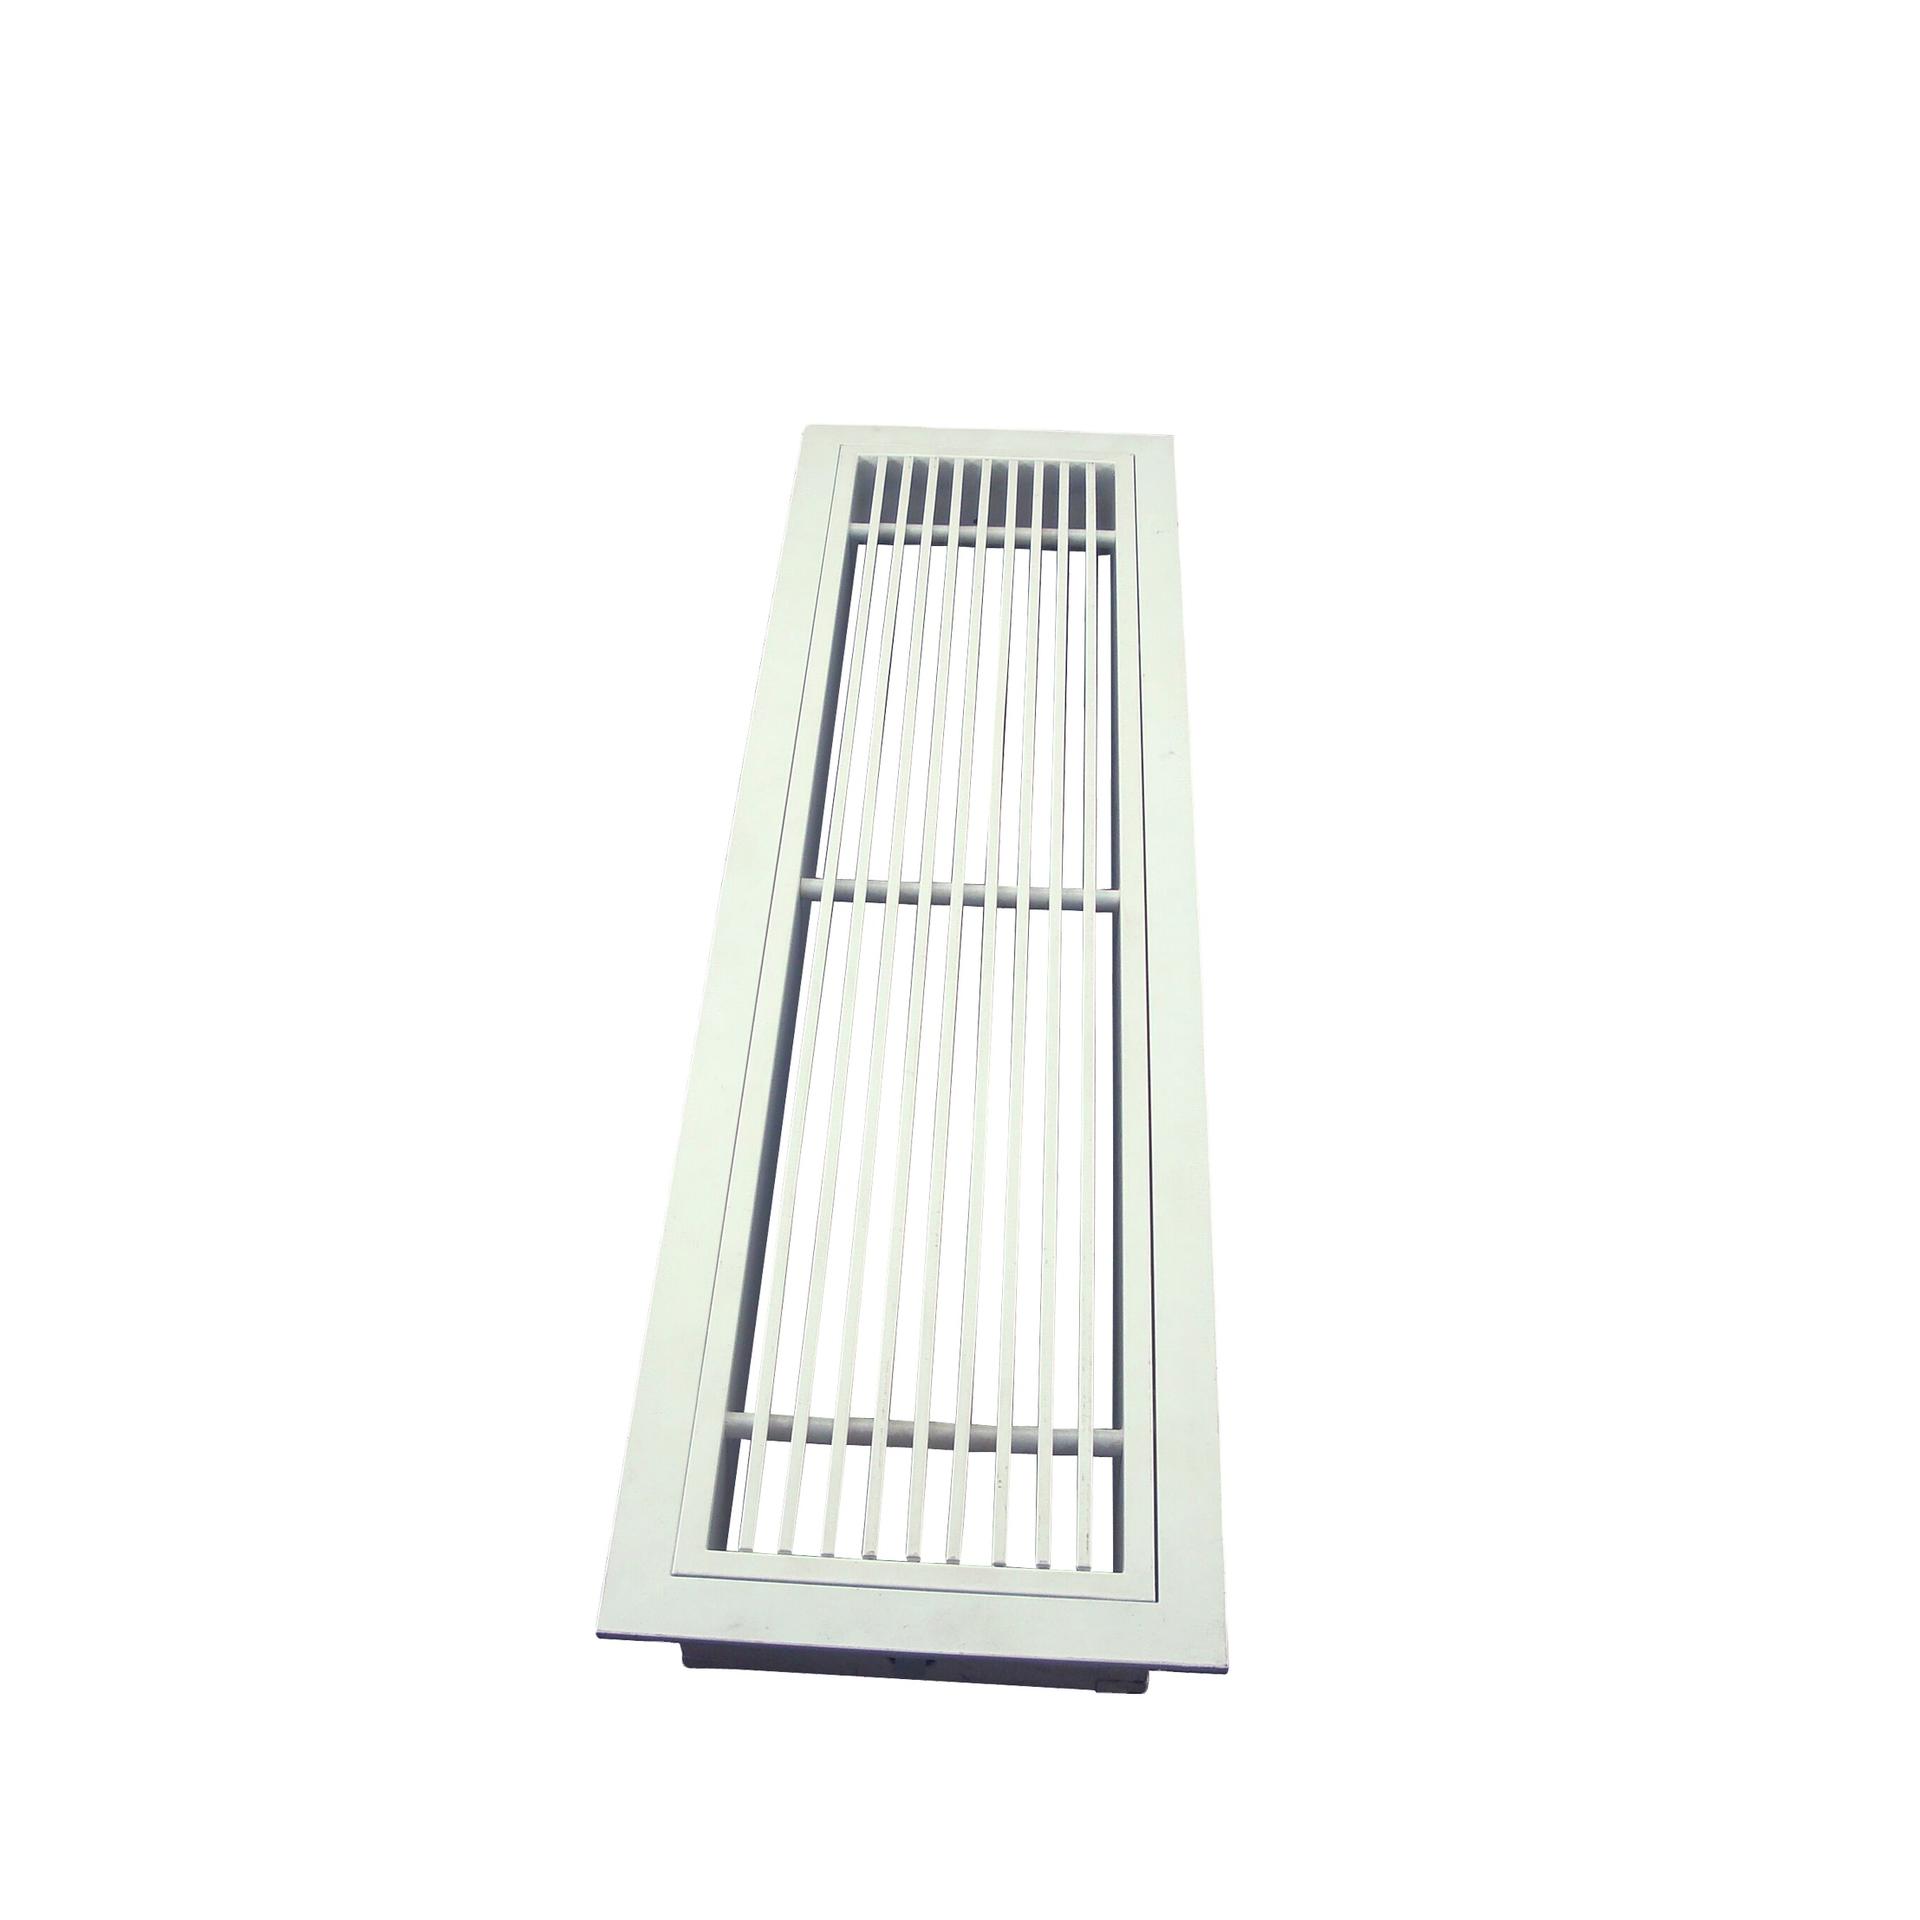 HVAC Removable Core Linear Bar Grille Hinged Supply Air Grille with Damper